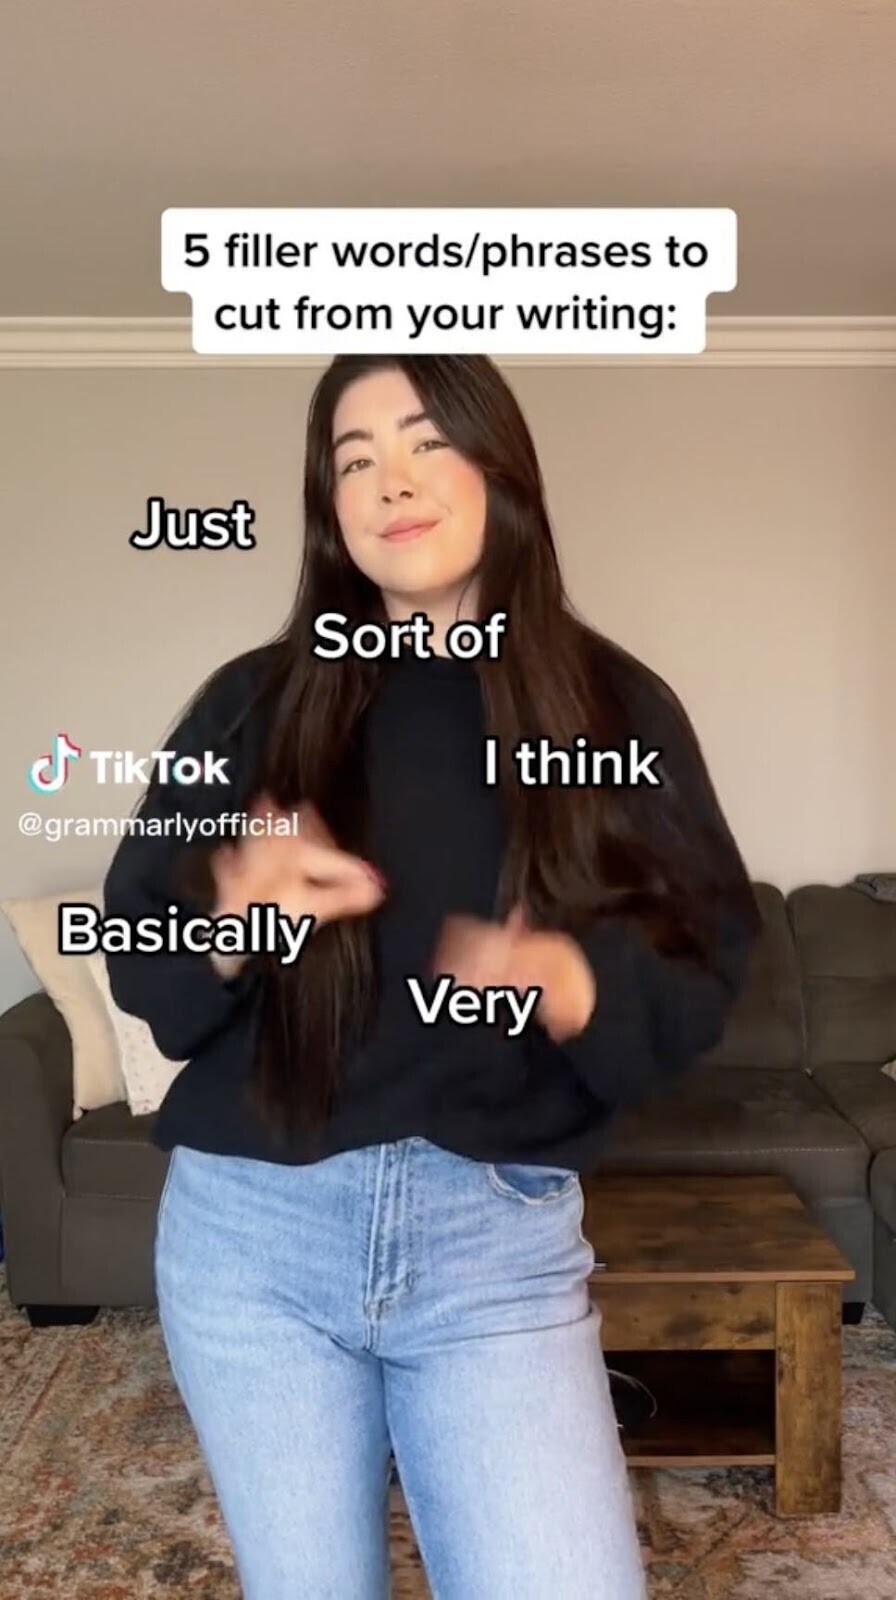 TikTok video by Grammarly teaching users about common filler phrases writers should avoid